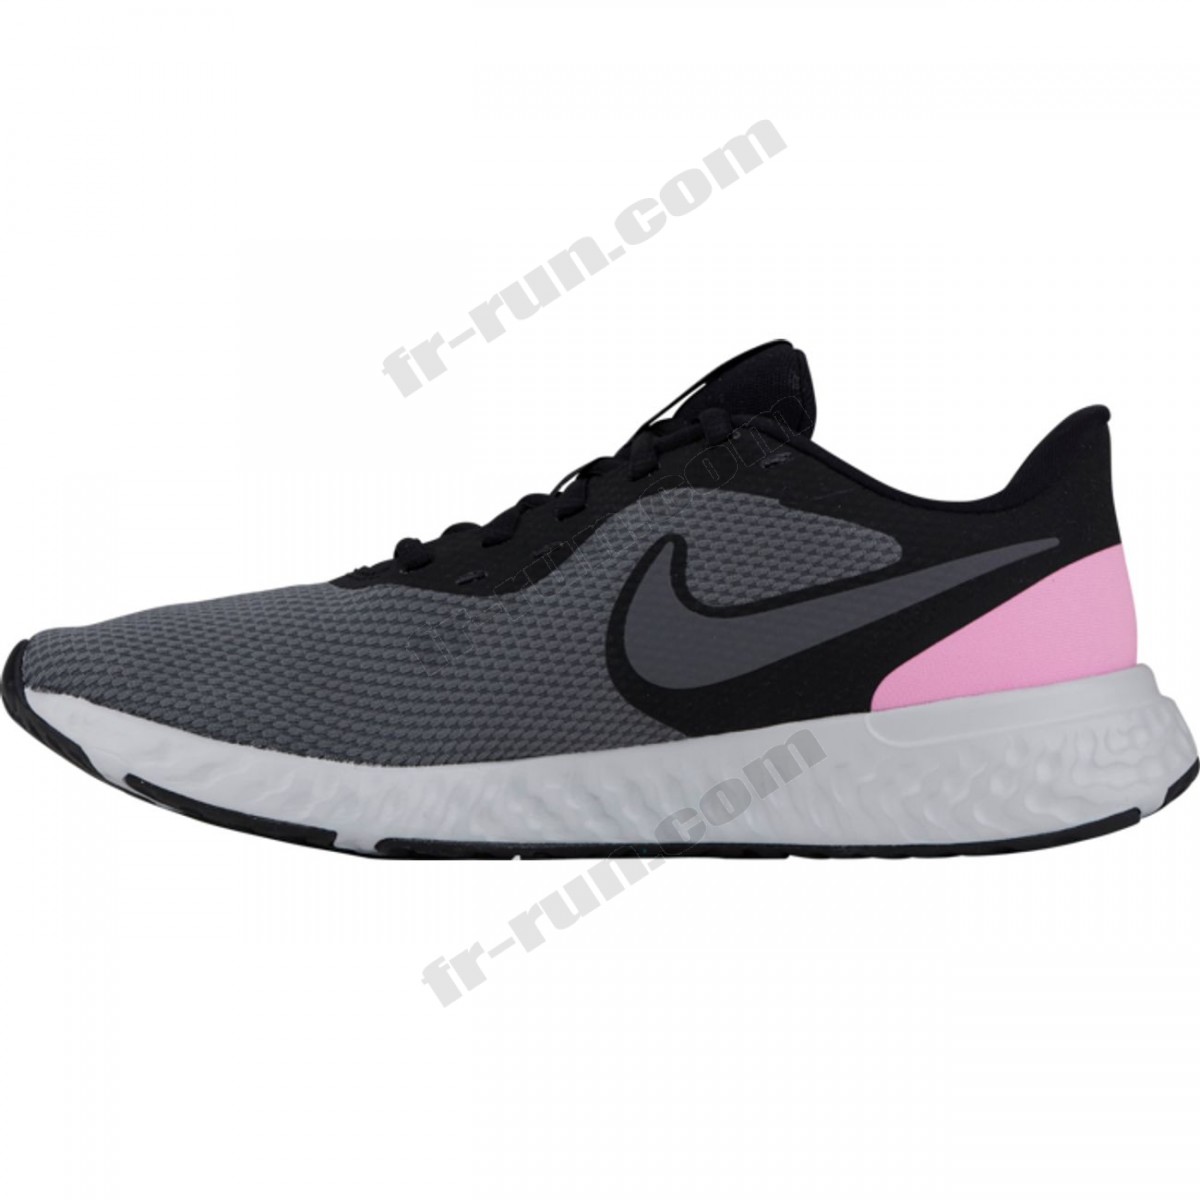 Nike/CHAUSSURES BASSES running femme NIKE WMNS NIKE REVOLUTION 5 √ Nouveau style √ Soldes - -1